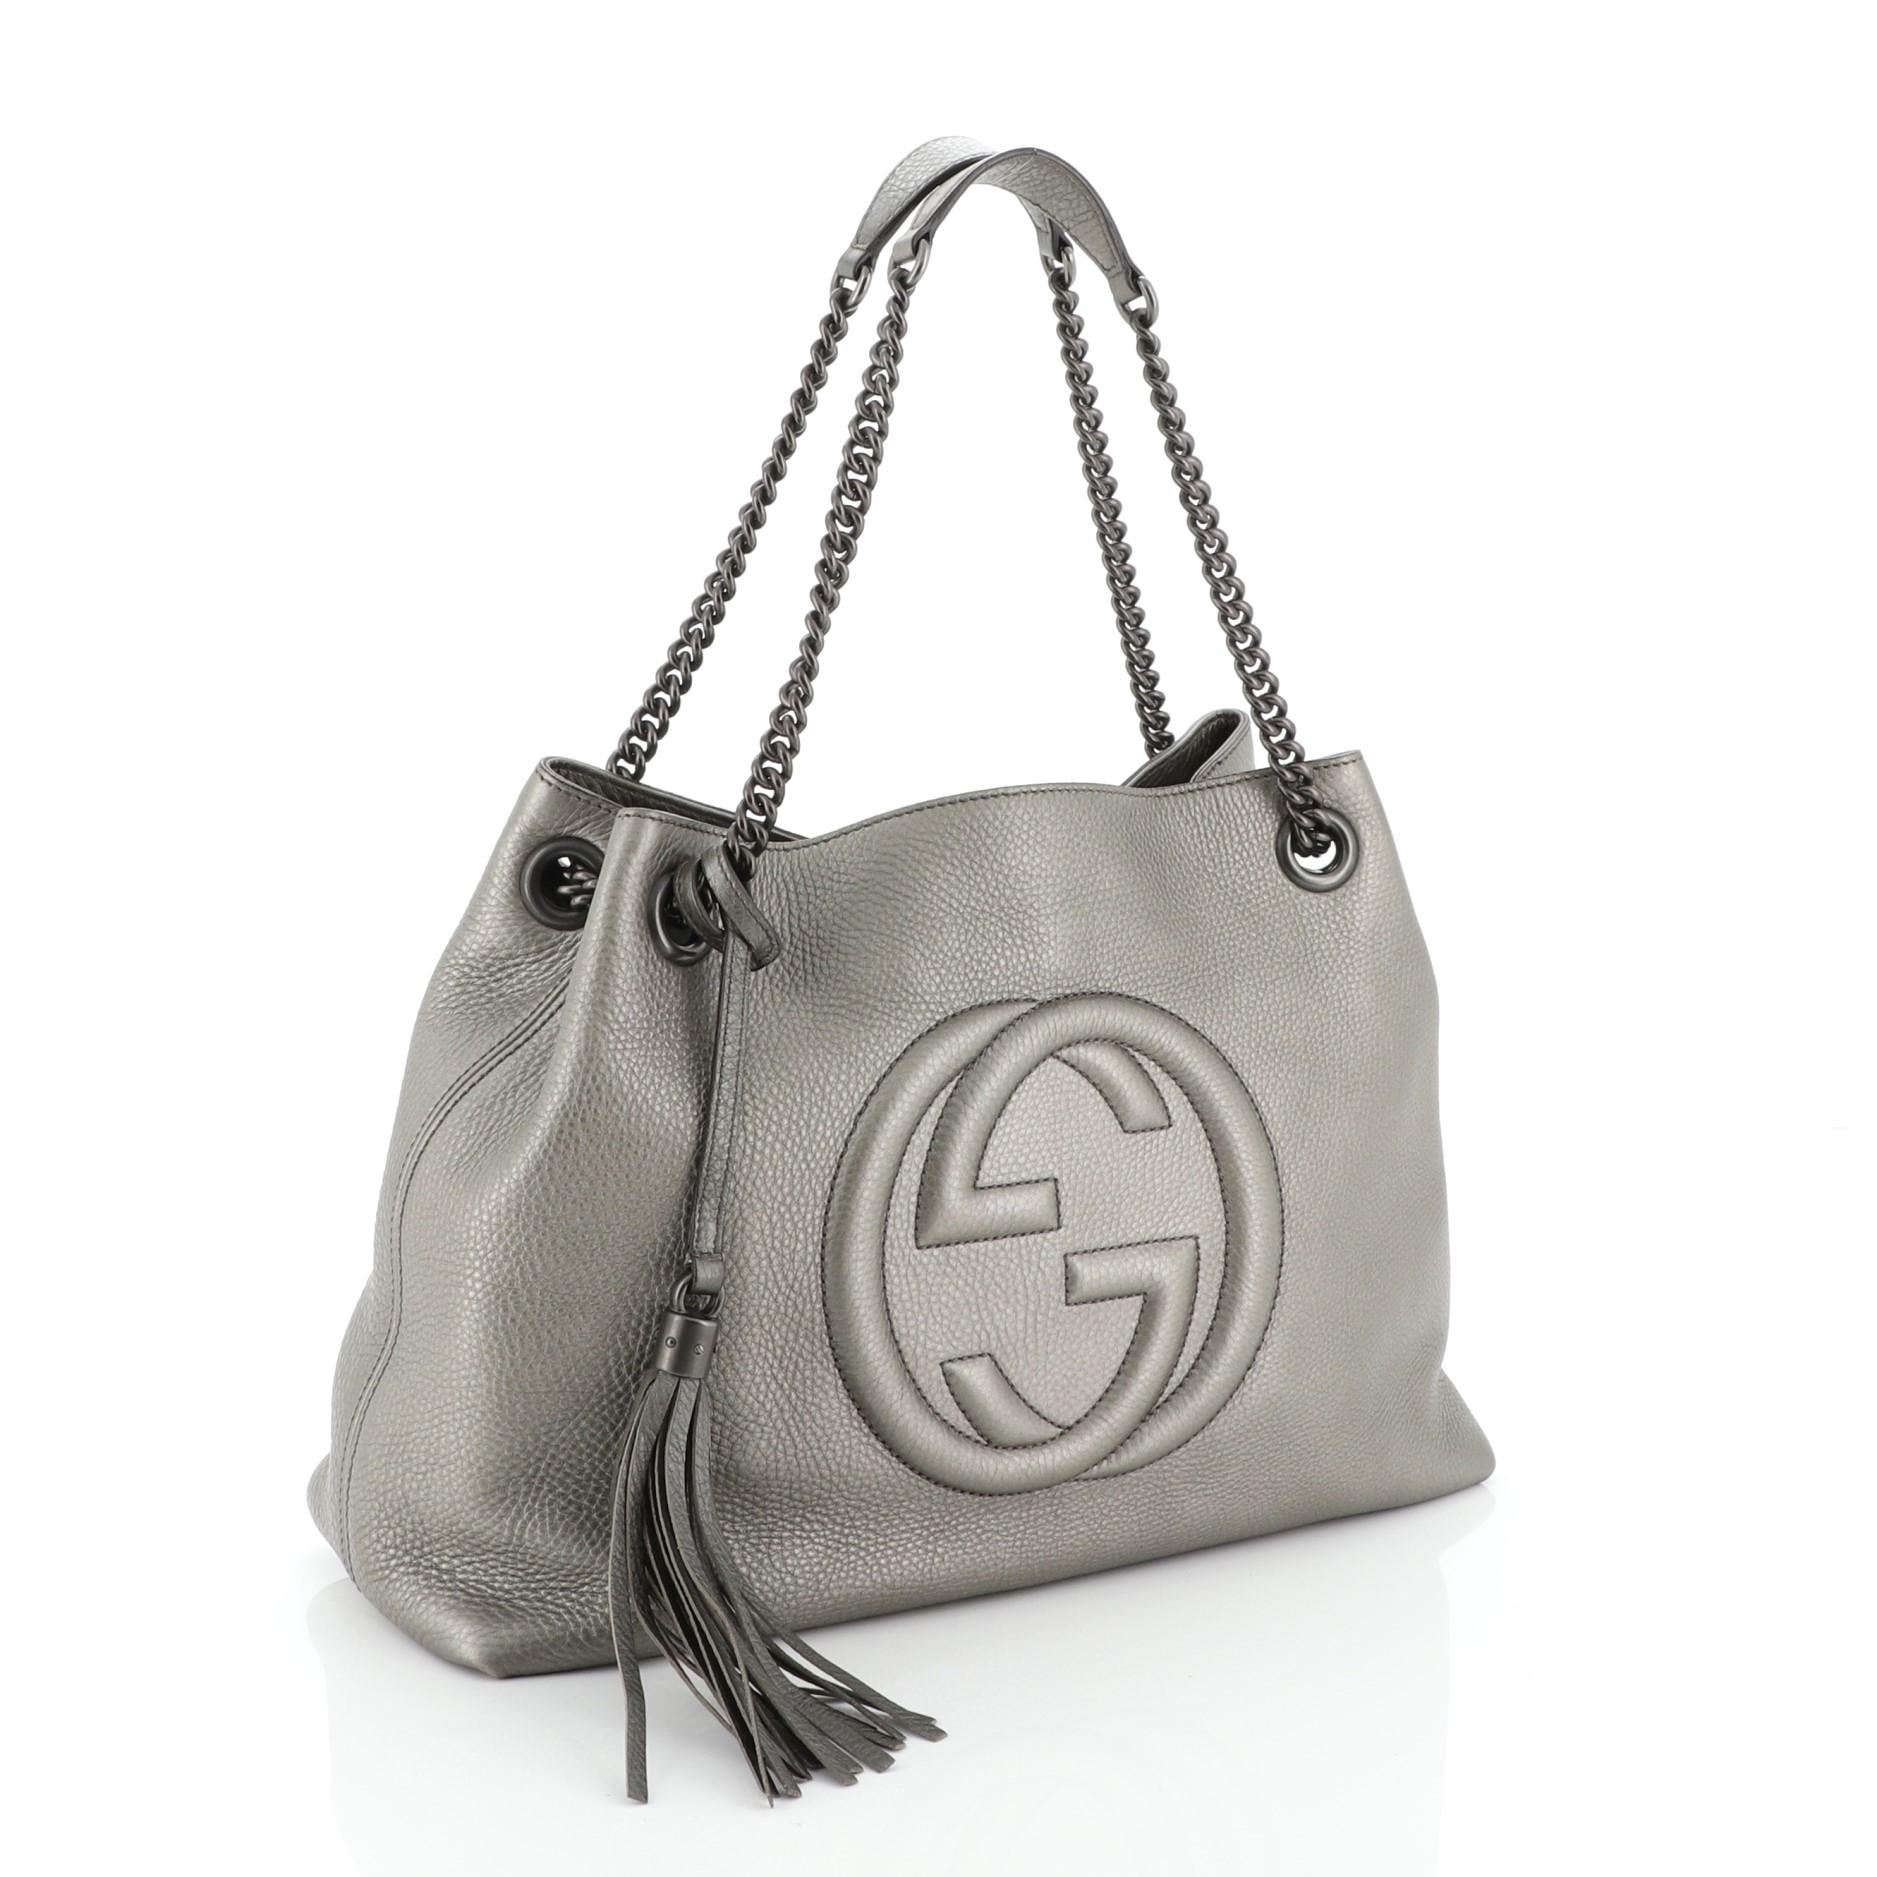 This Gucci Soho Chain Strap Shoulder Bag Leather Medium, crafted in gray leather, features chain link straps with leather pads and gunmetal-tone hardware. Its hook clasp closure opens to a neutral fabric interior with side zip and slip pockets.